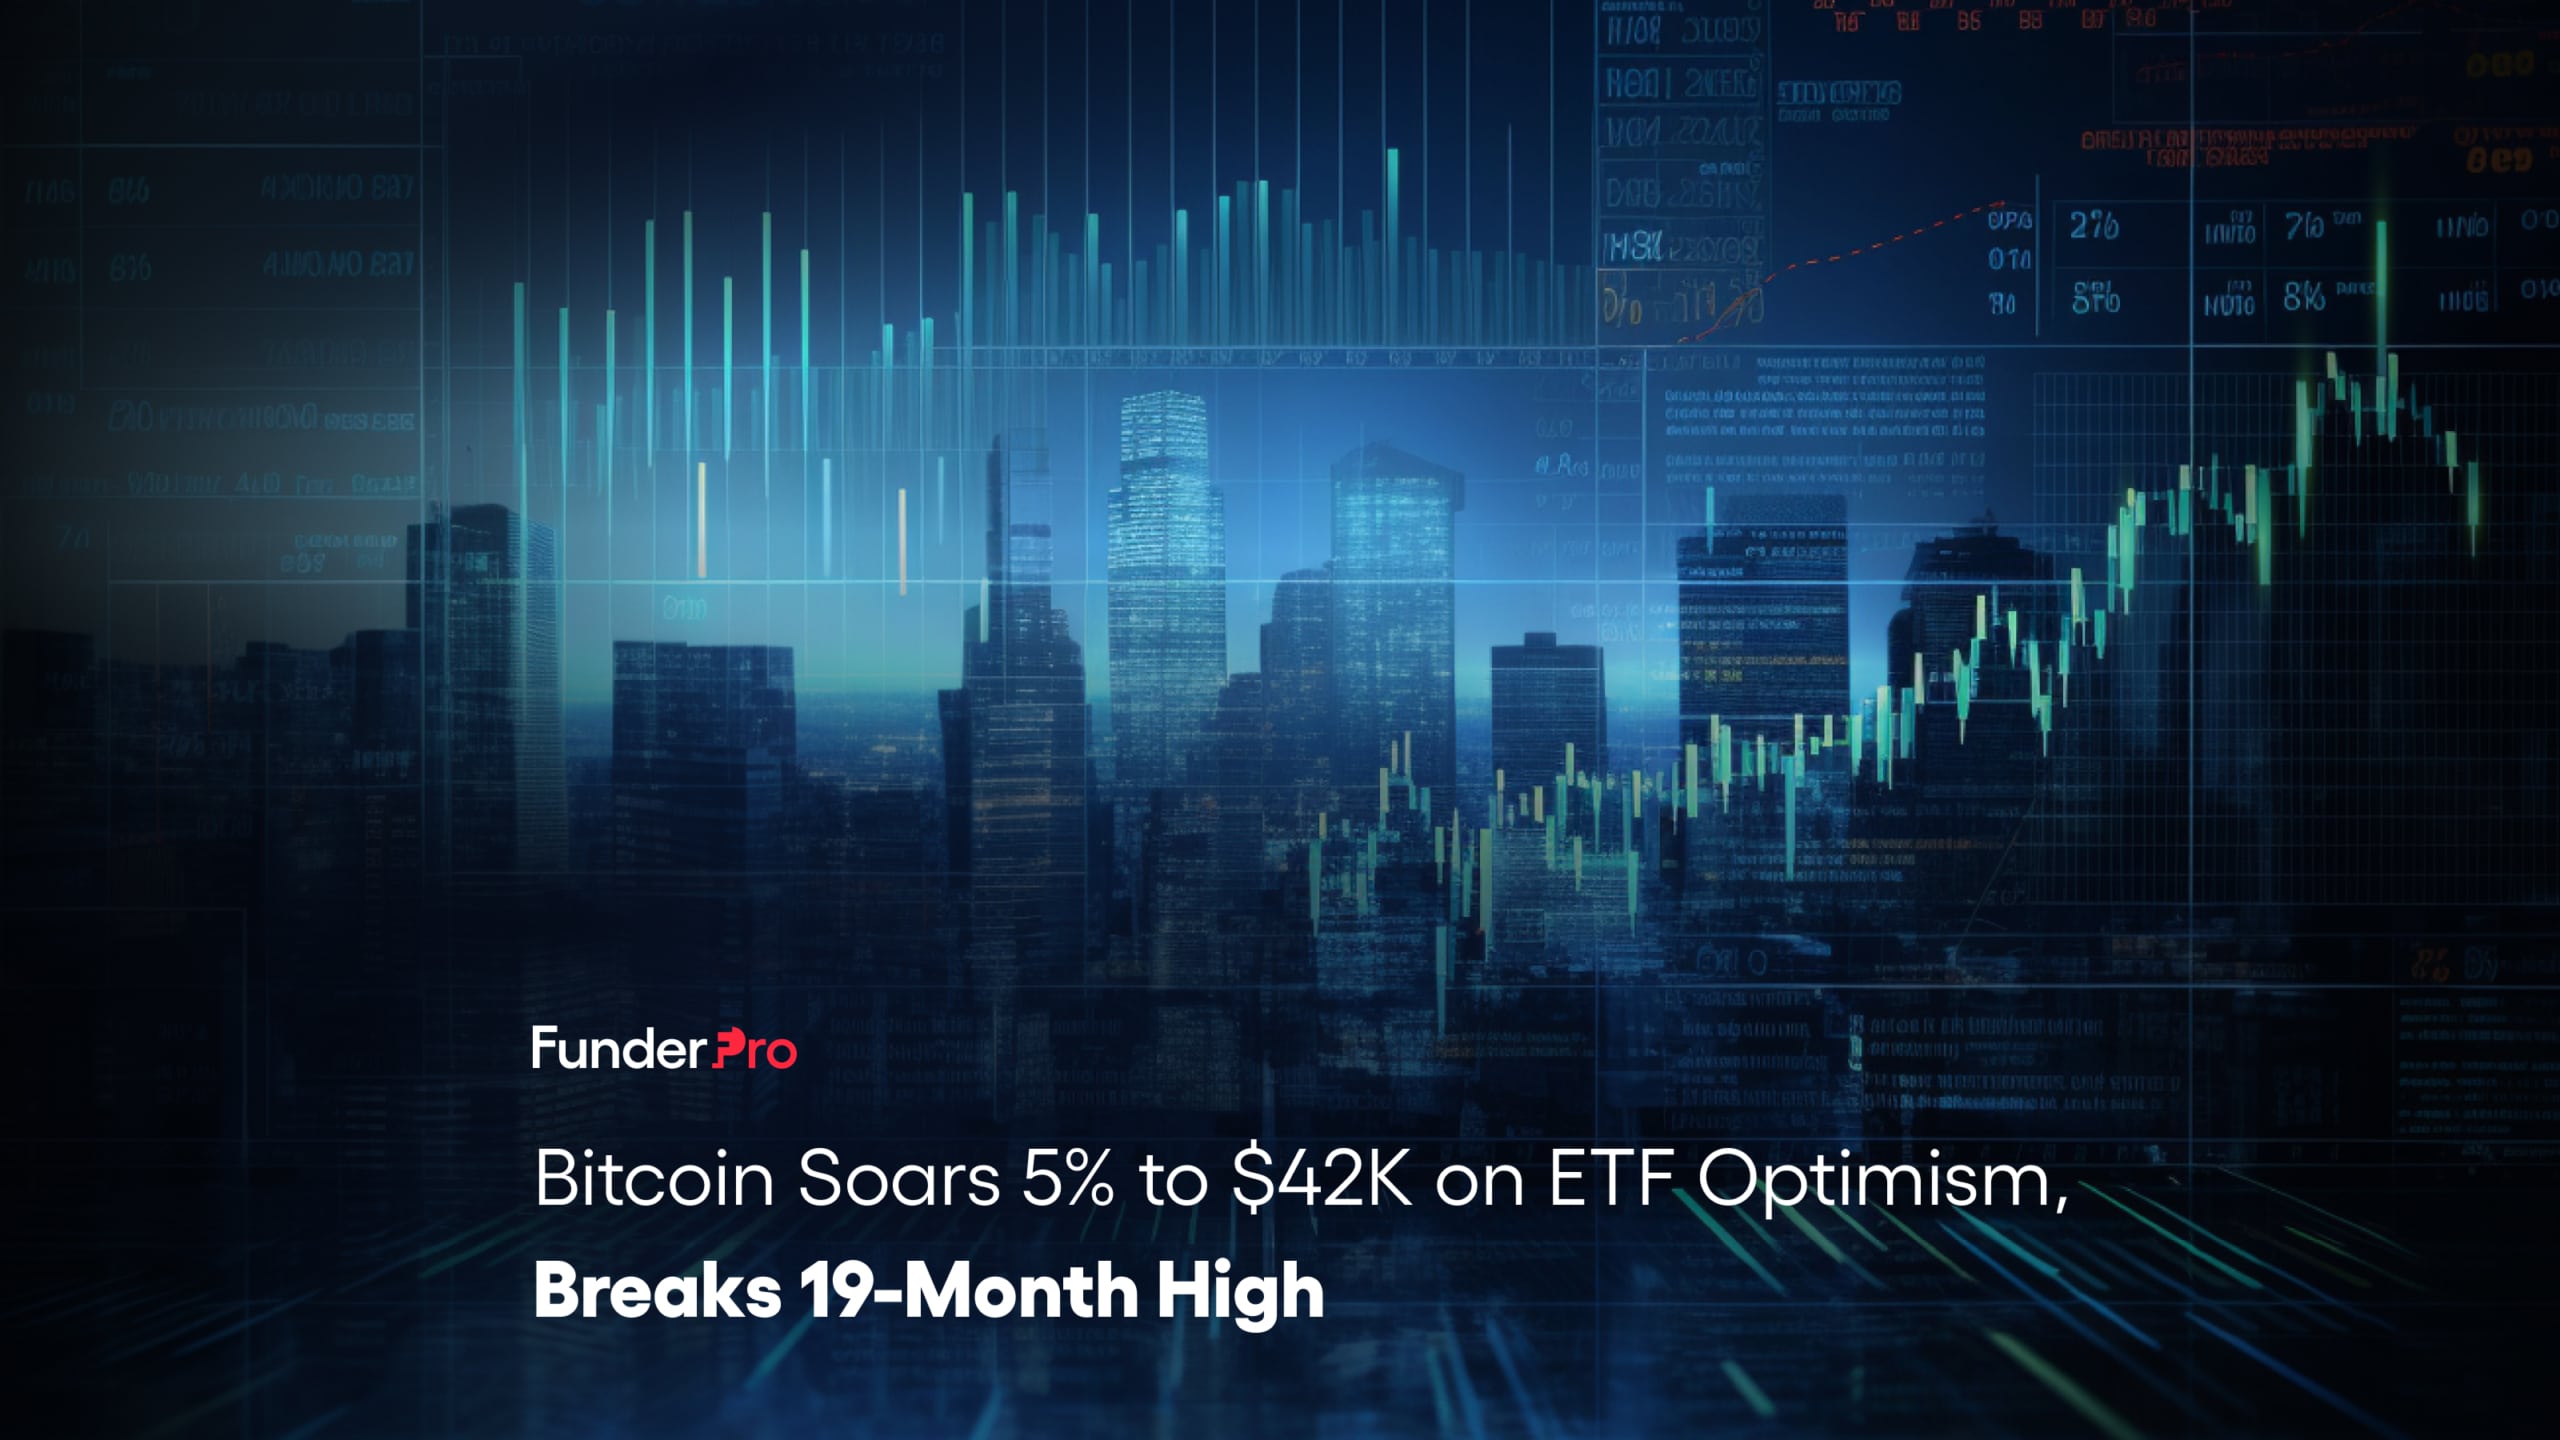 Bitcoin Soars 5% to $42K on ETF Optimism, Breaks 19-Month High